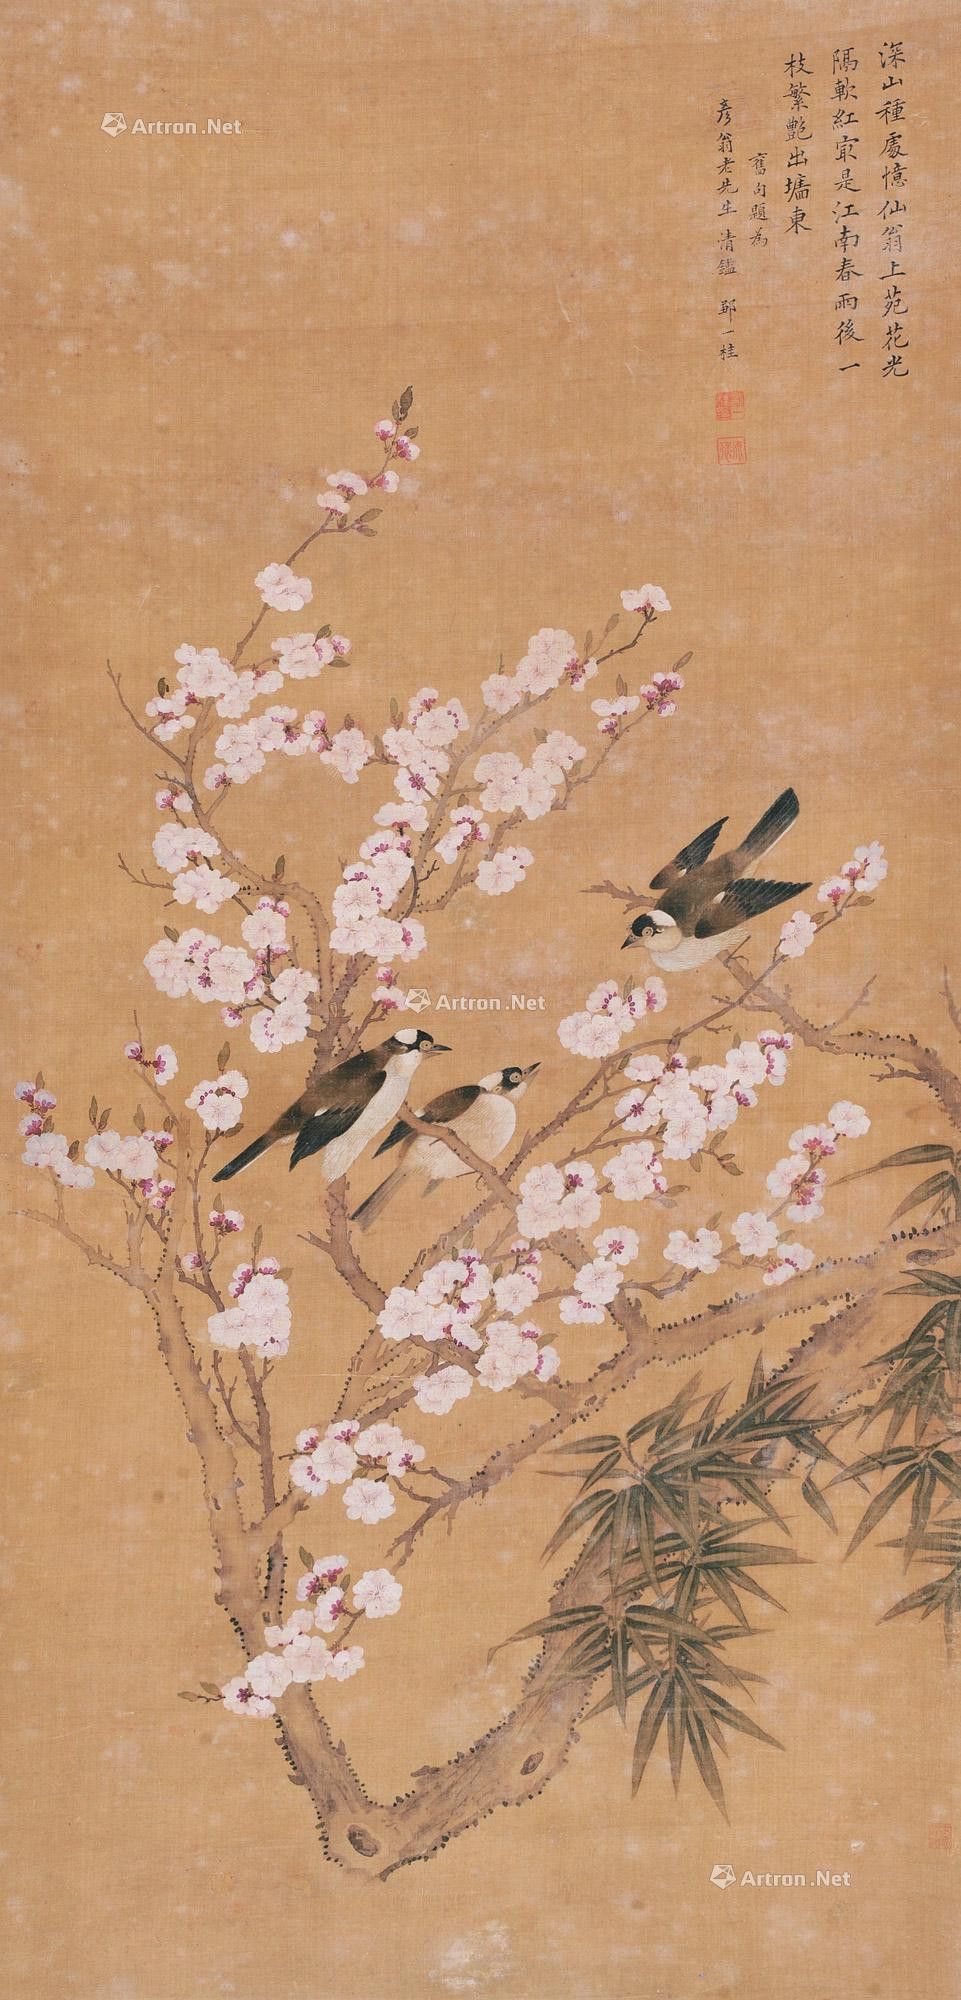 FLOWERS AND BIRDS